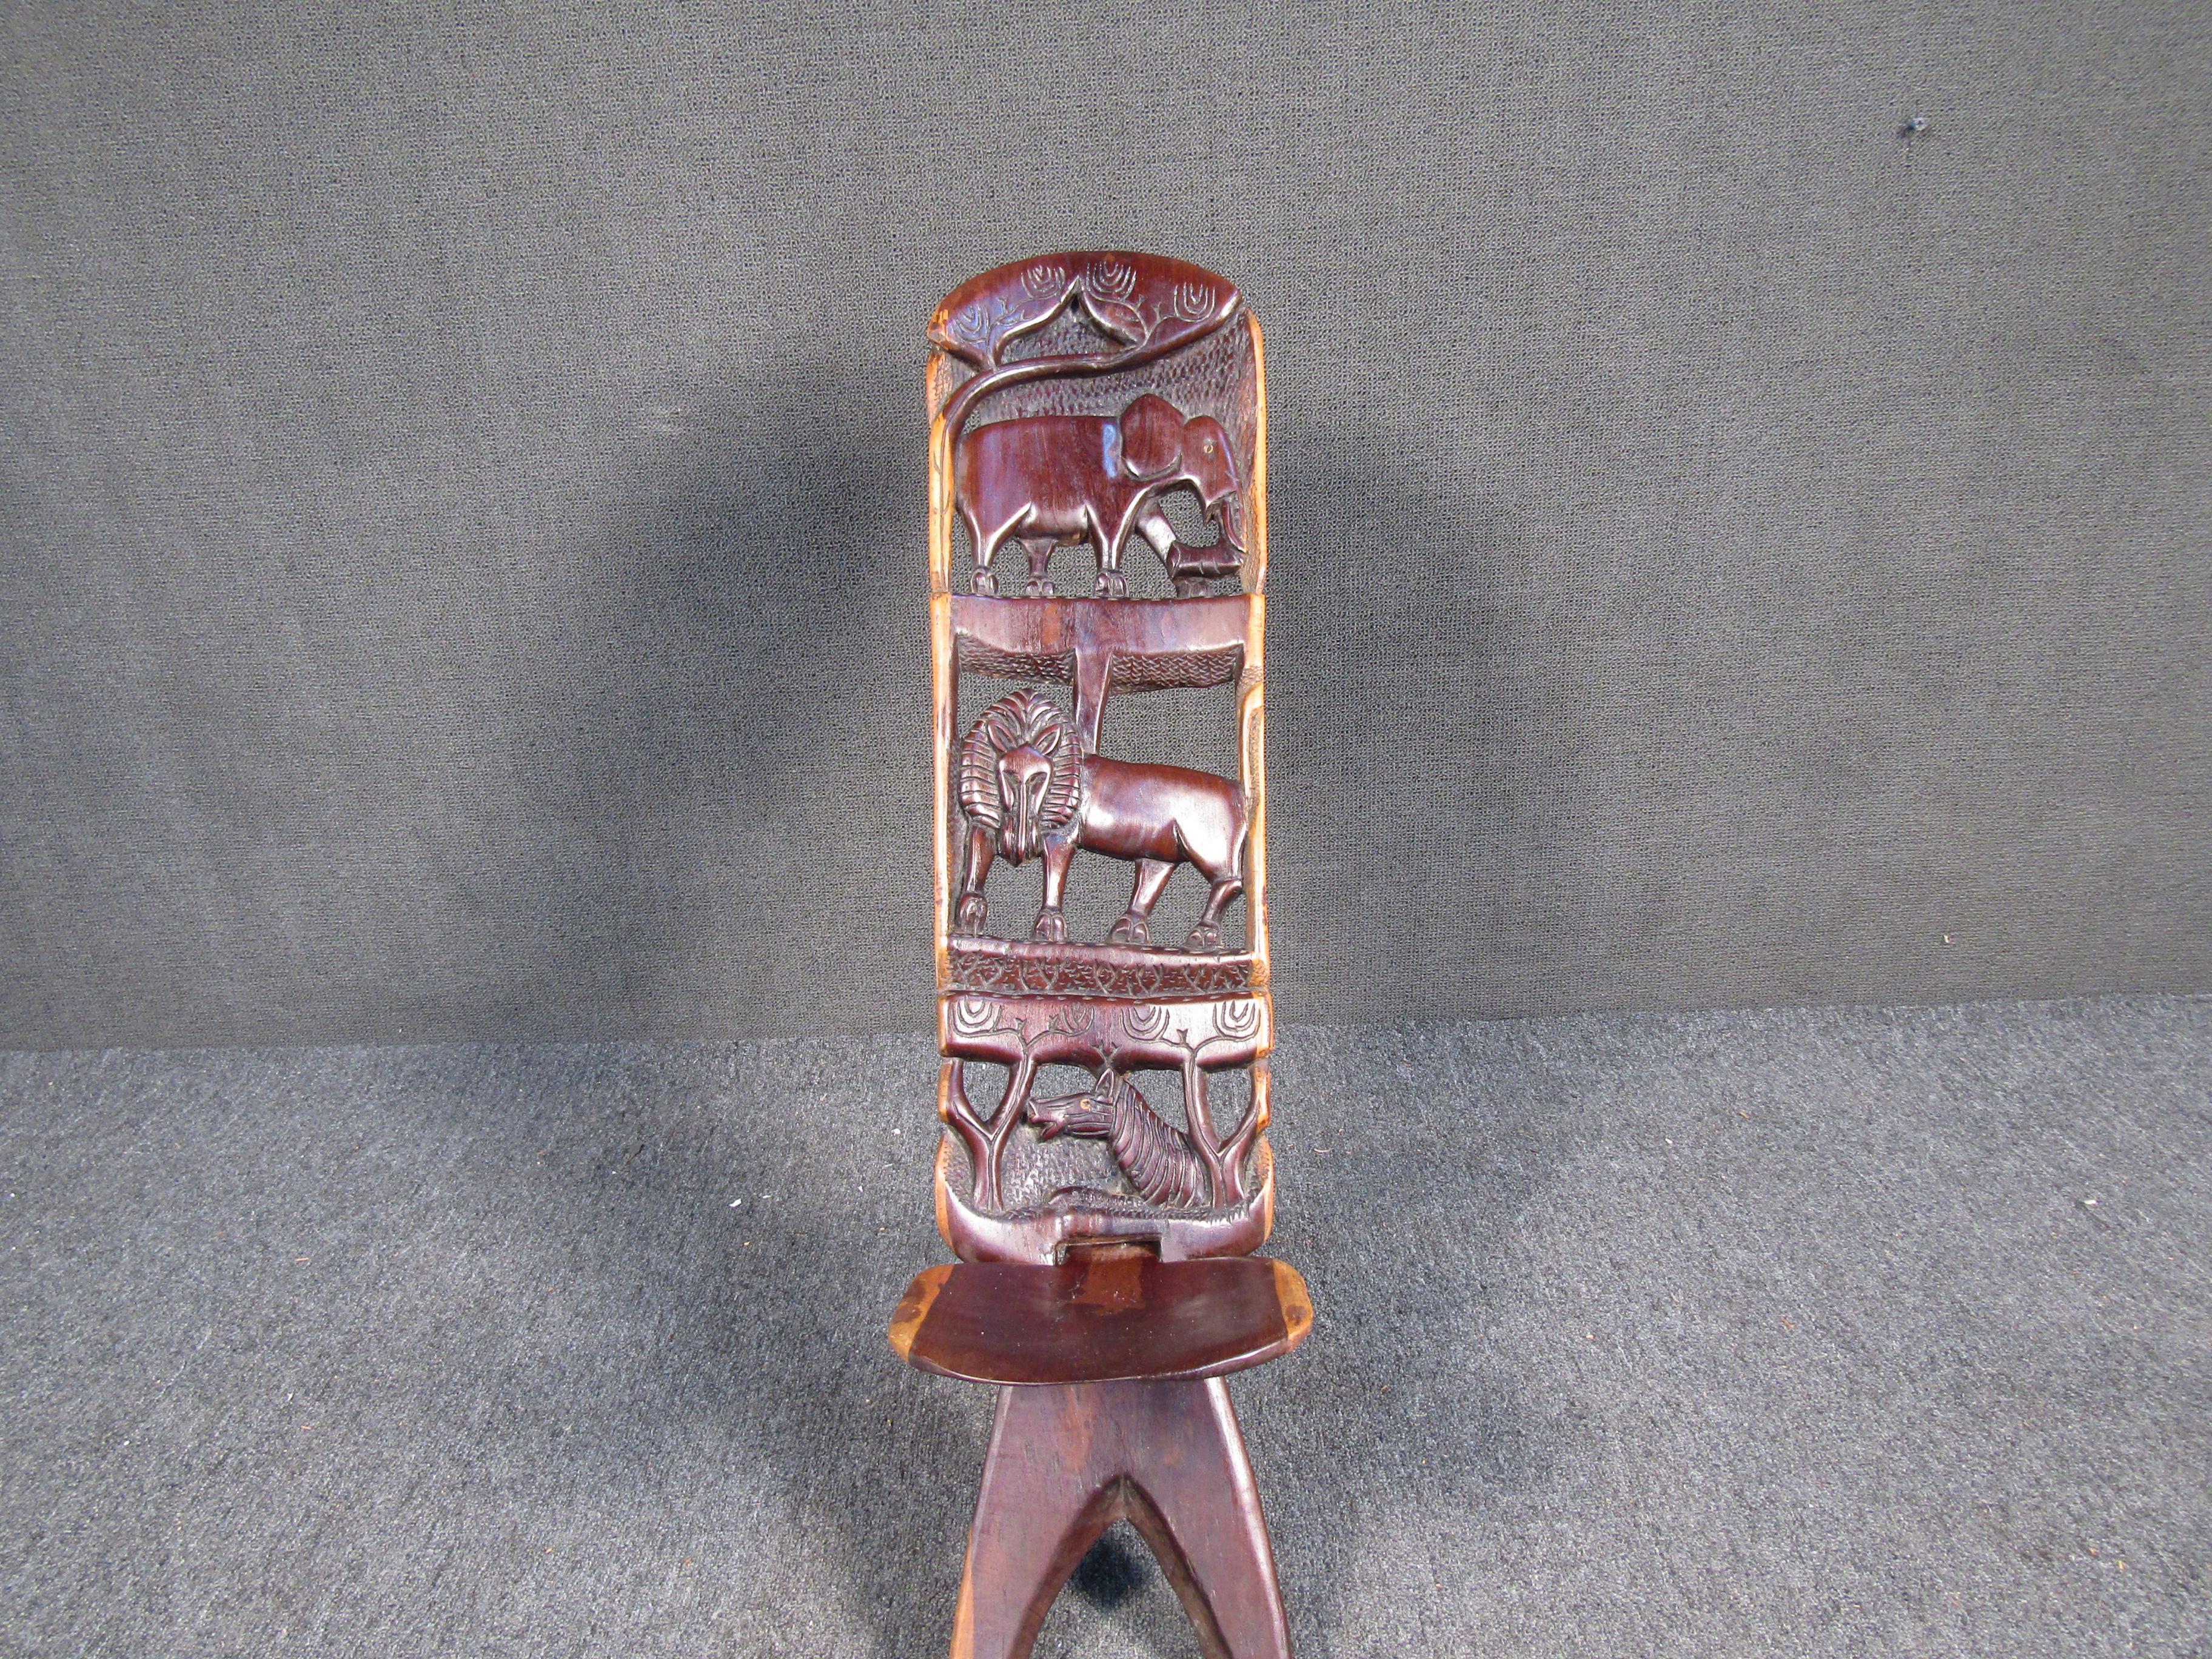 Intricate African style seat. Beautiful wood carvings.
(Please confirm item location - NY or NJ - with dealer).
 